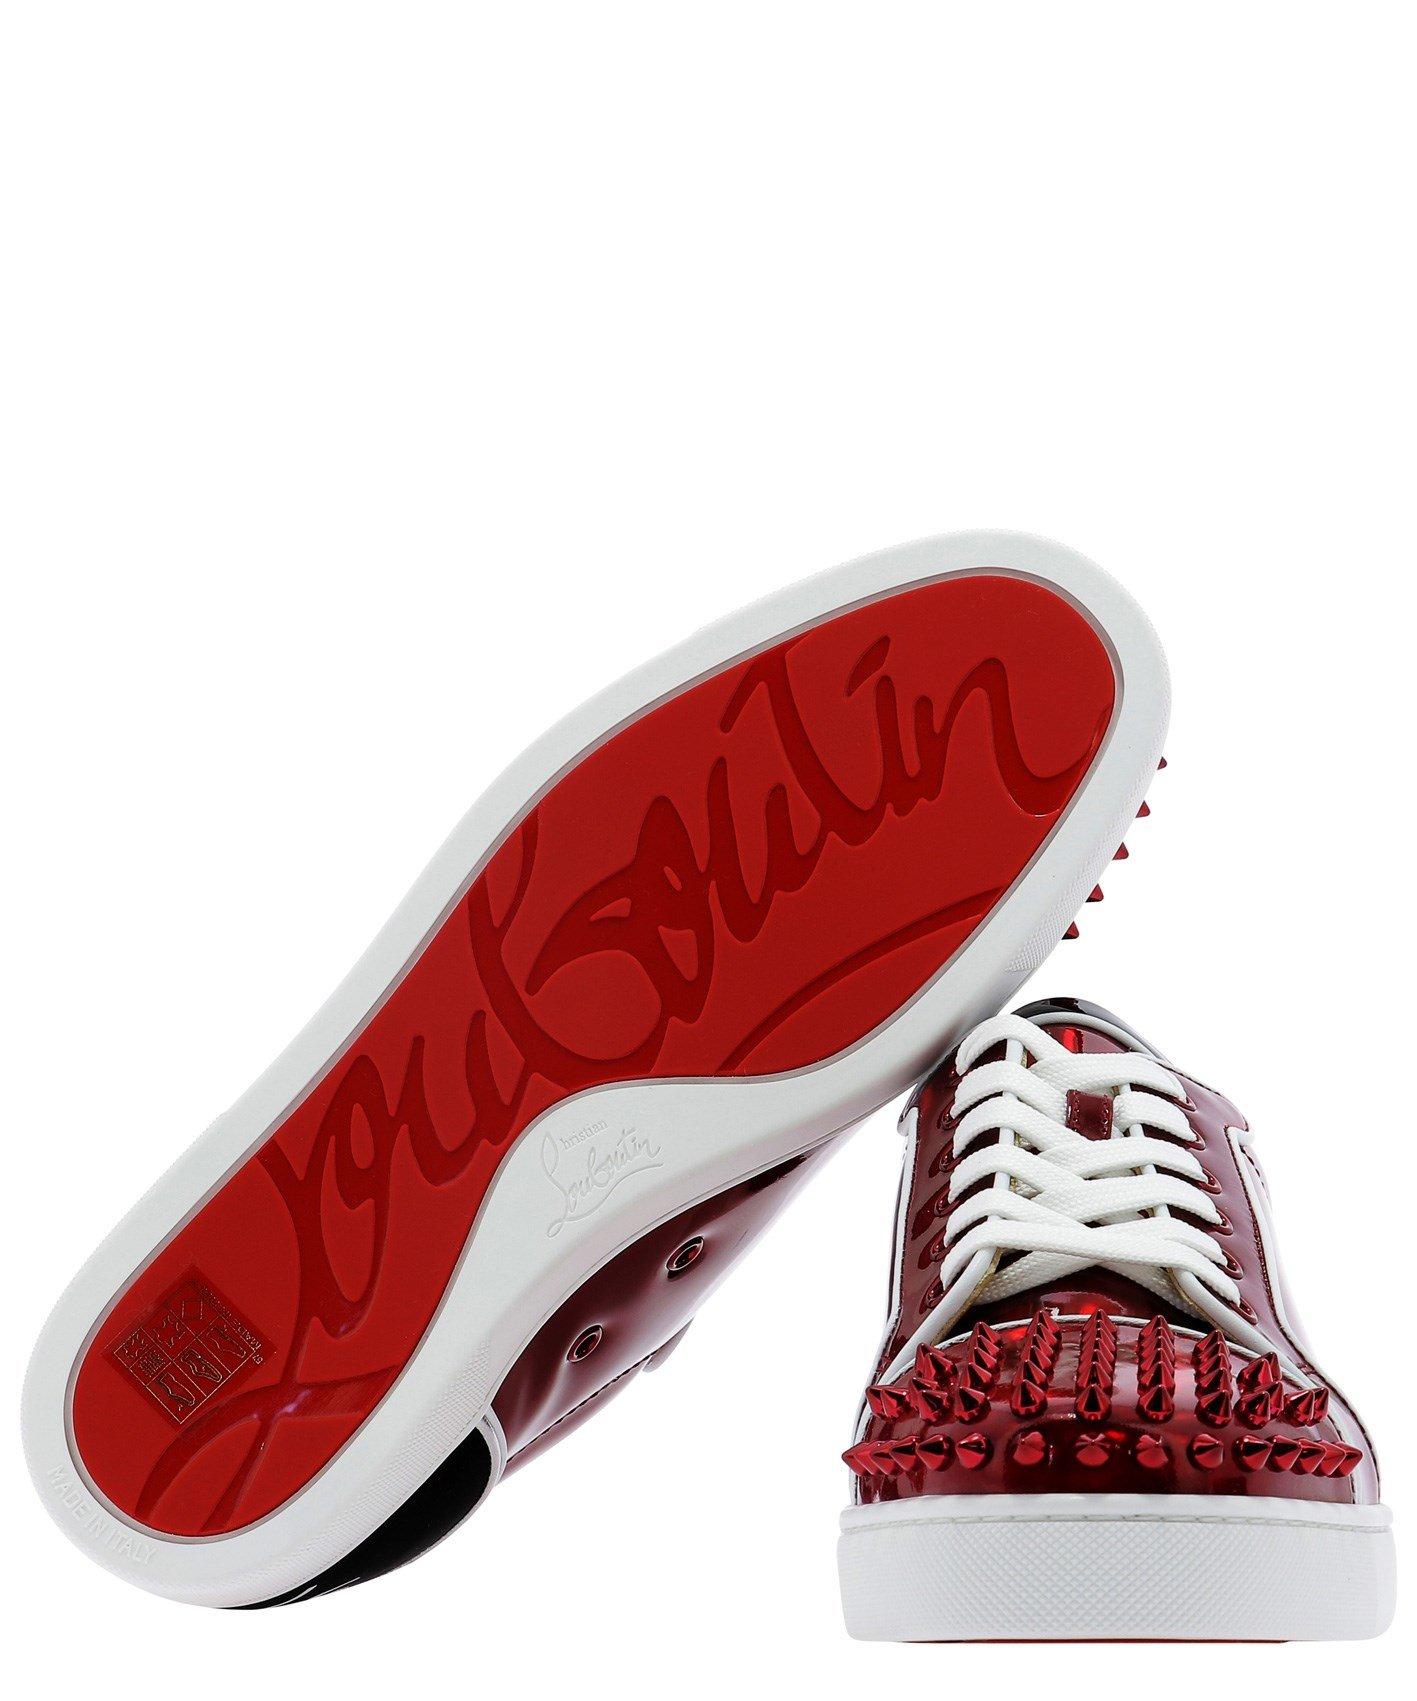 Louboutin Spike Shoes - 188 For Sale on 1stDibs  louboutin spike sneakers,  shoes with spikes on them, red spiky shoes